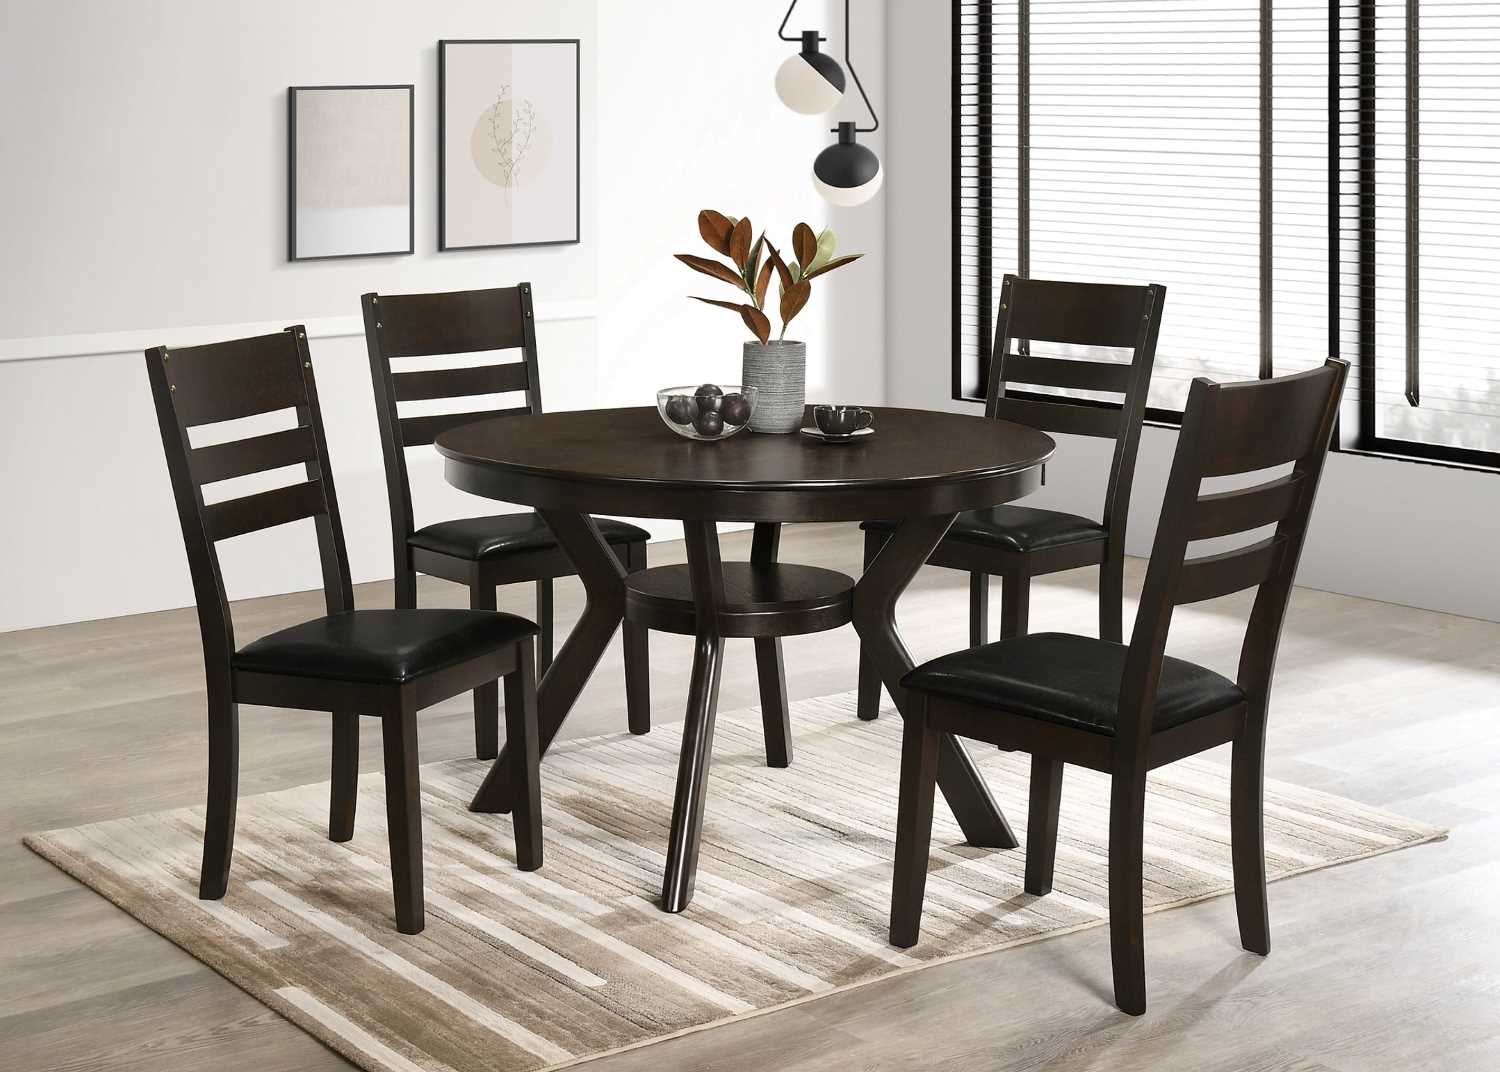 Dining Collection Espresso T-1085 / C-1091